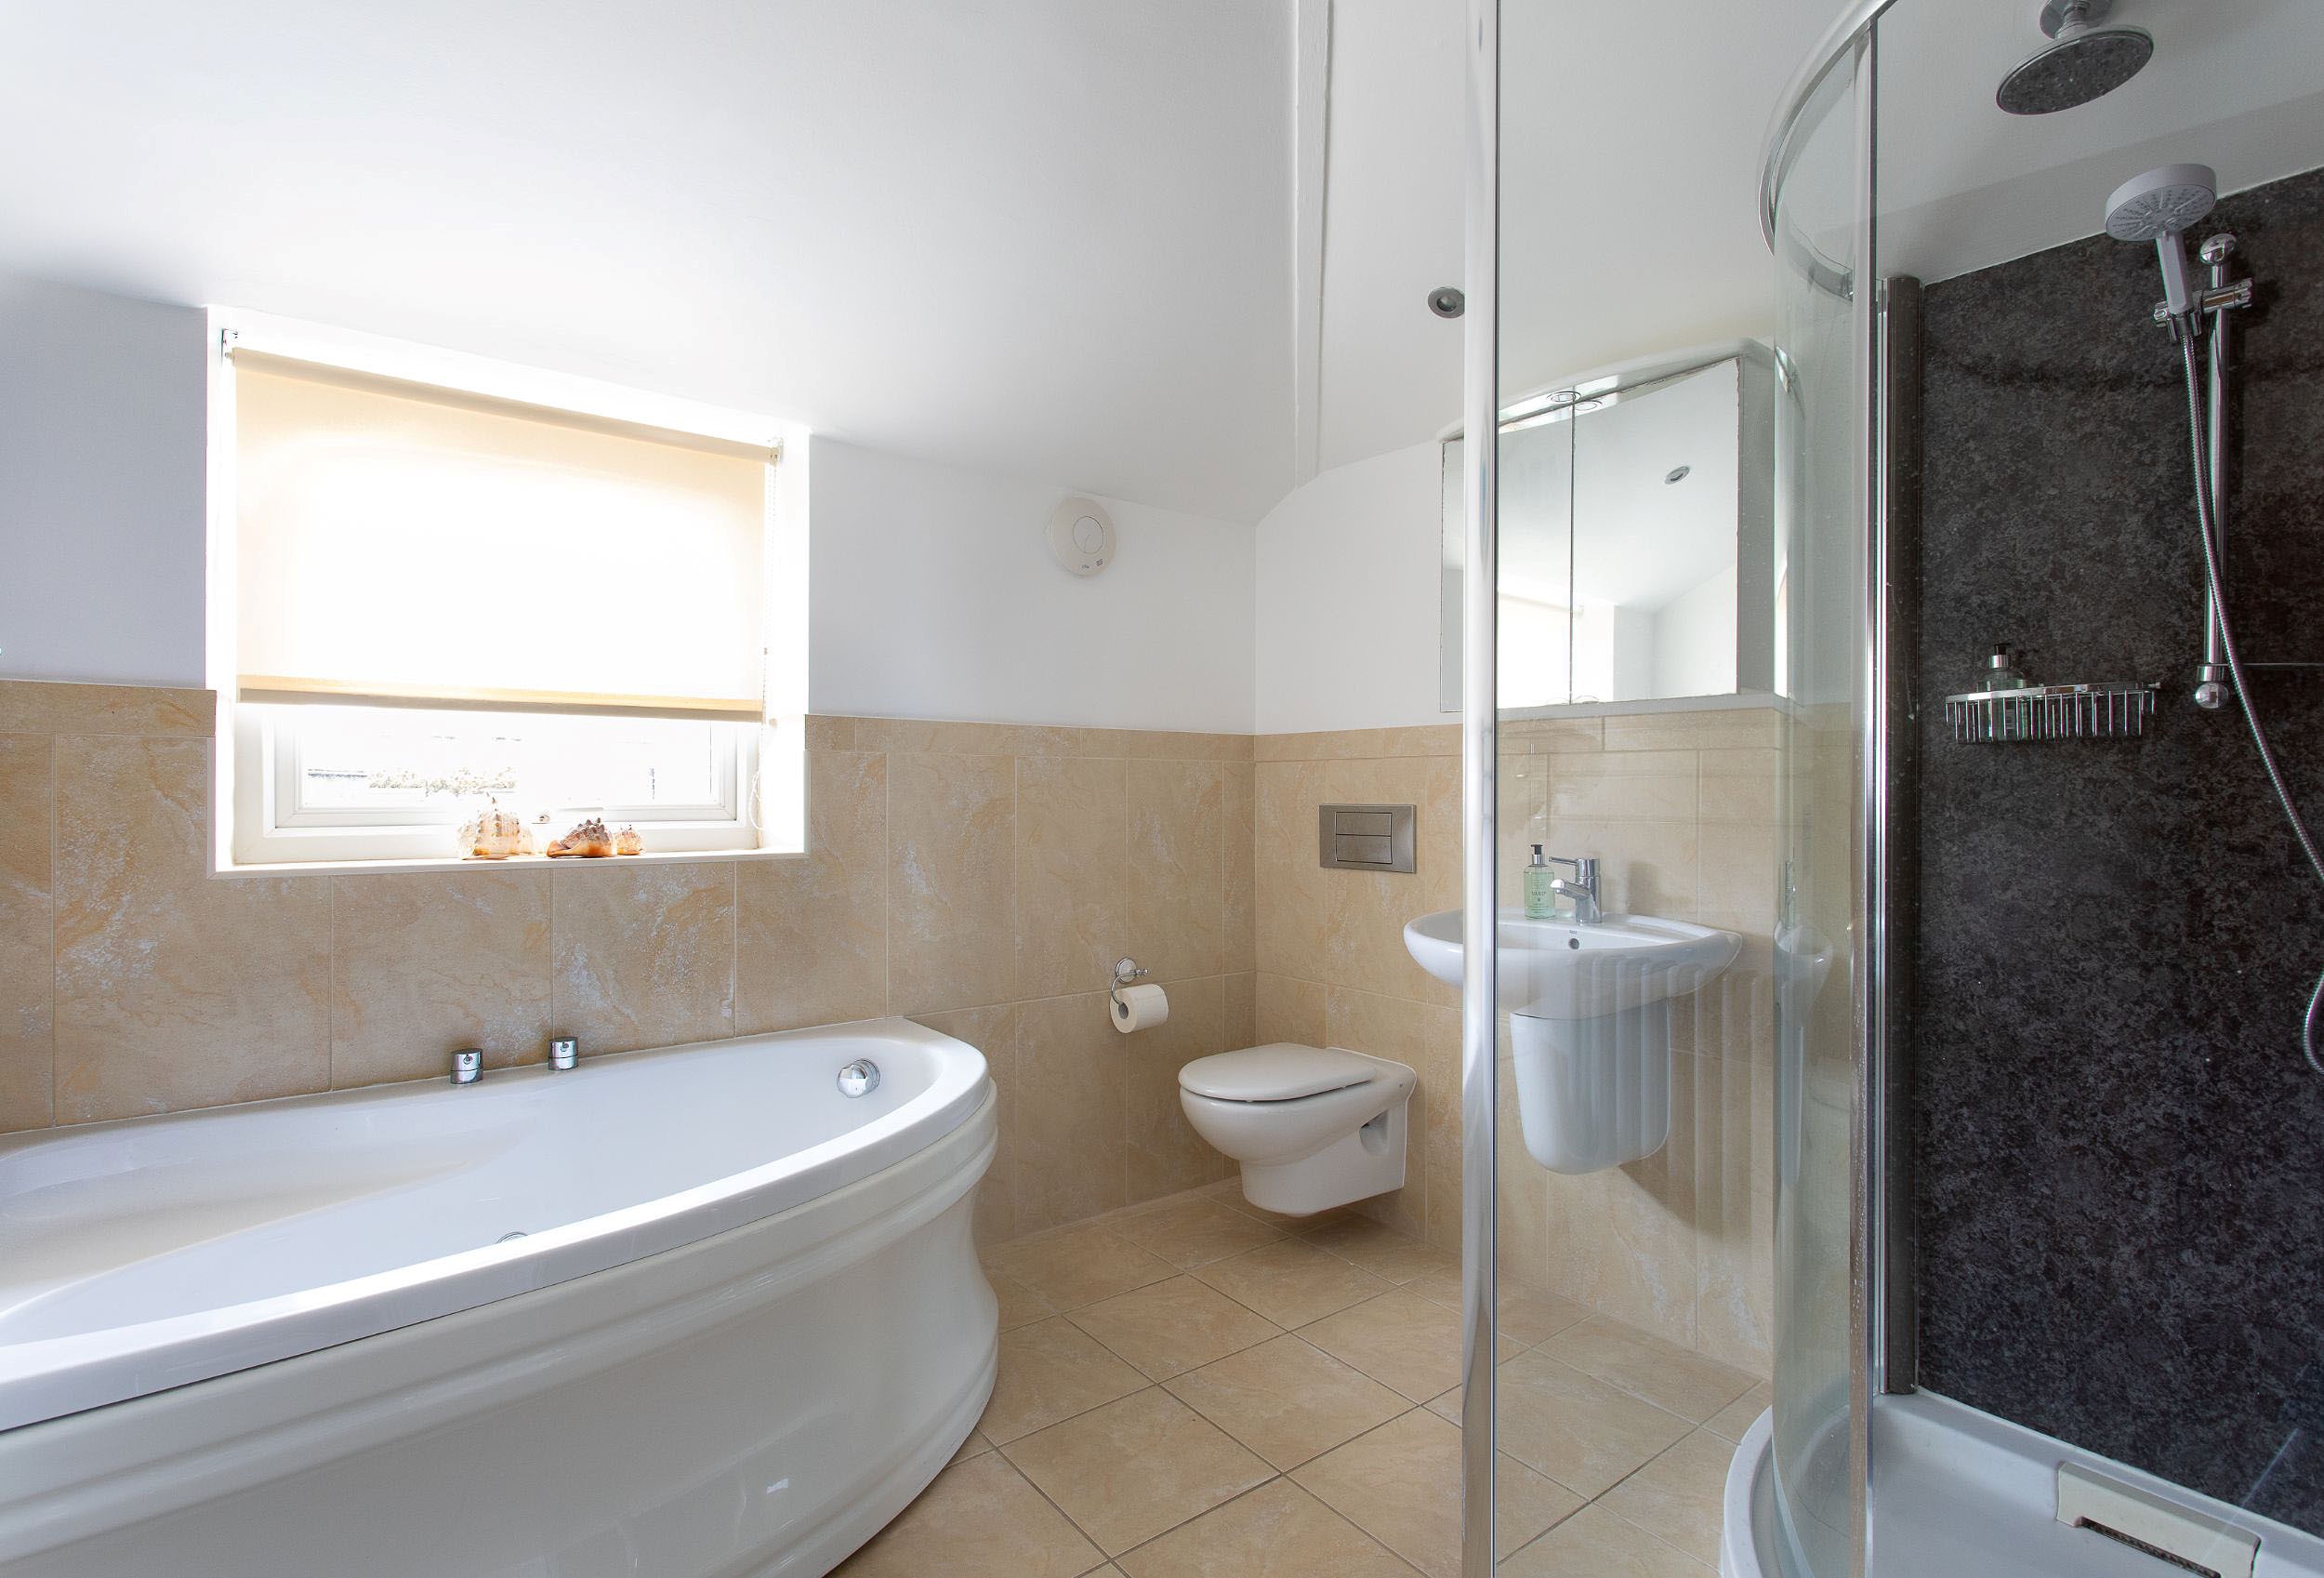 Sea Breeze - family bathroom with bath, separate corner shower, WC and basin